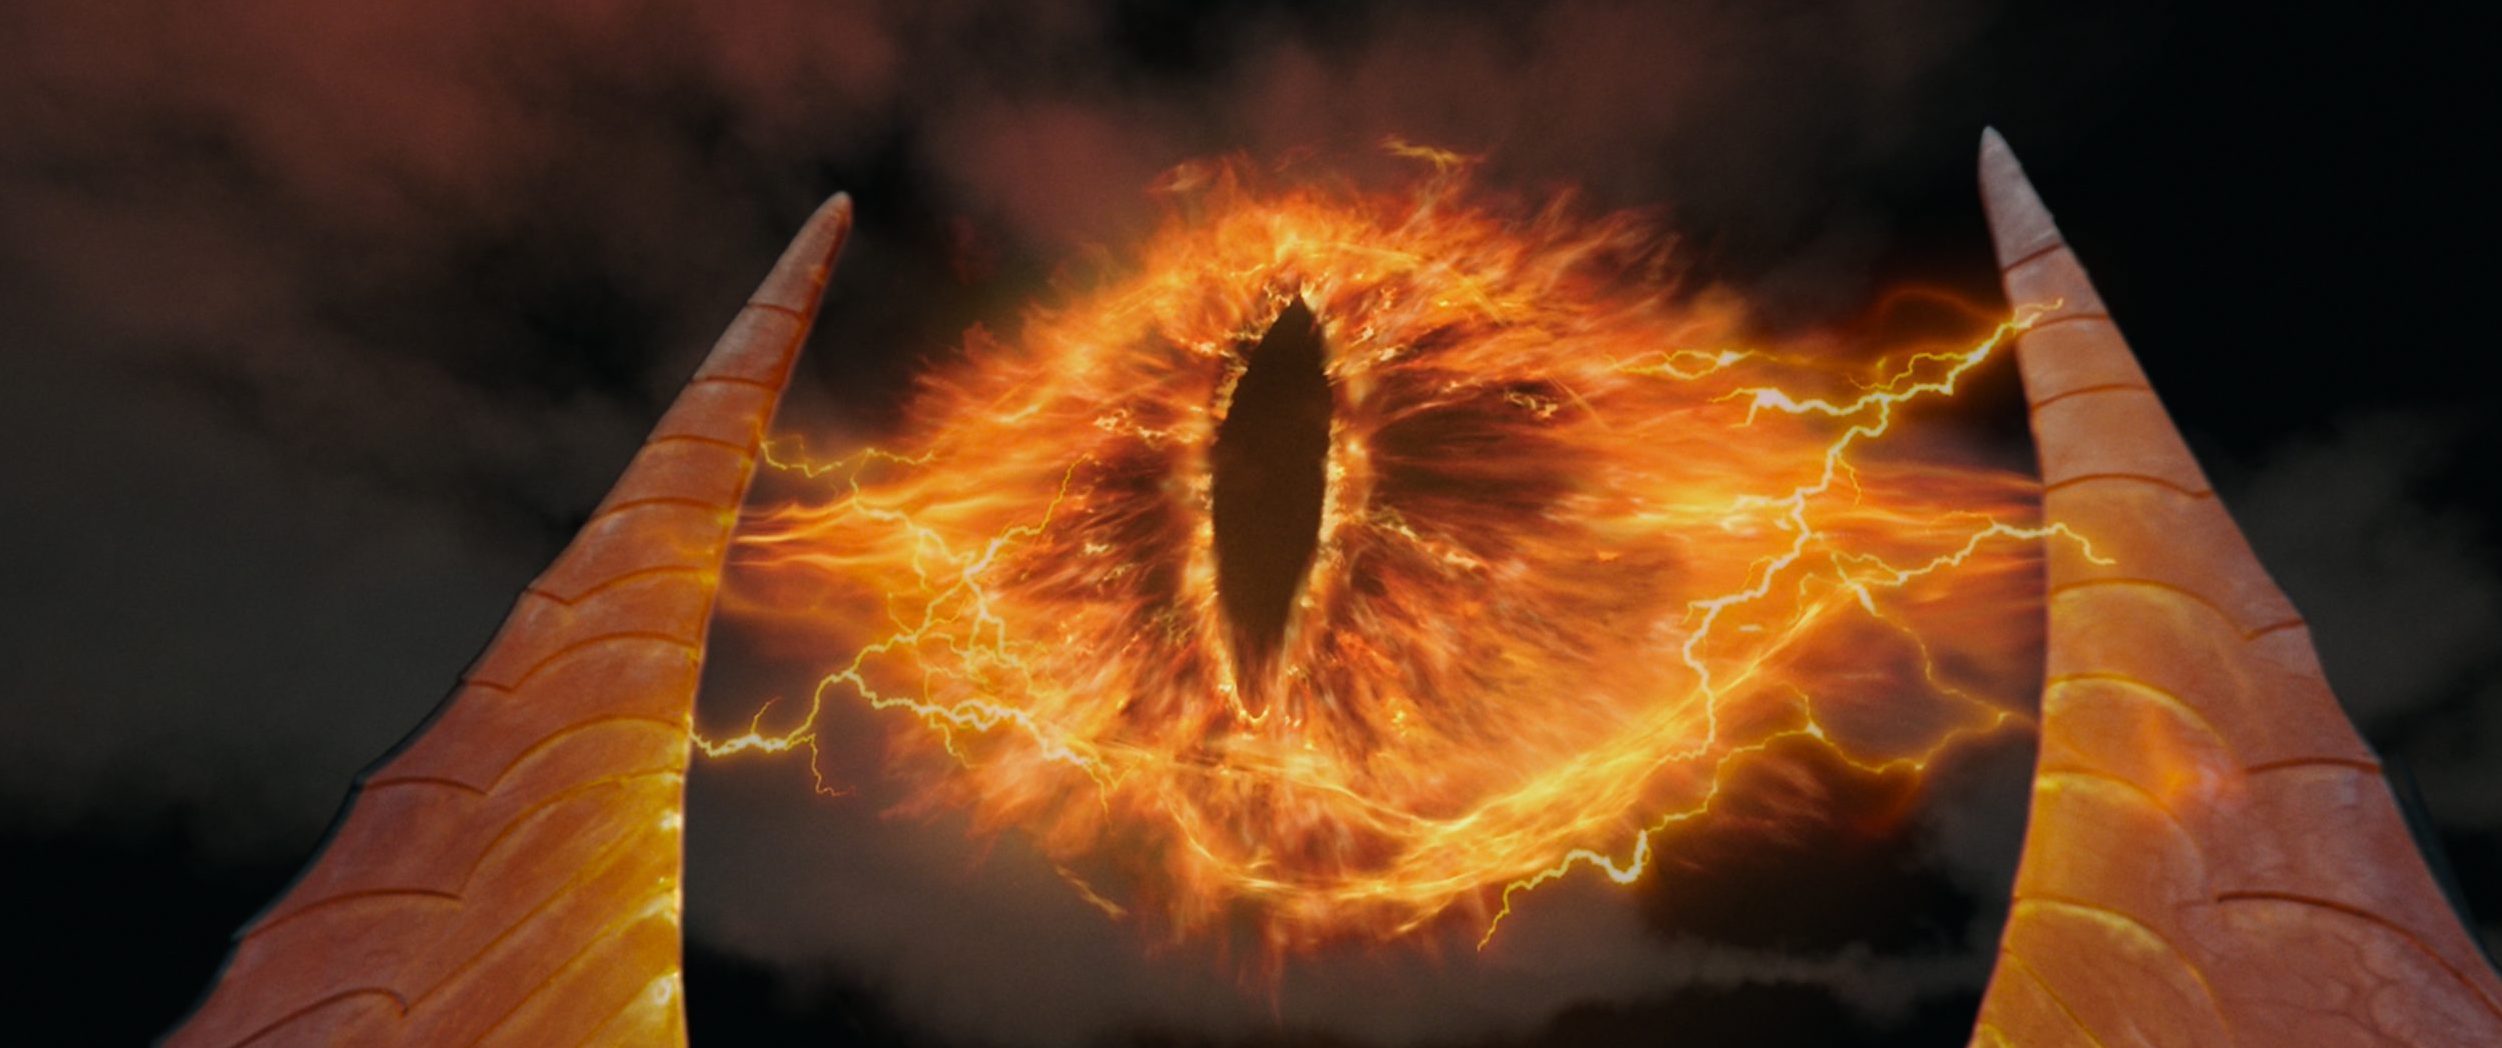 The Eye of Sauron at the tp of Barad-dûr in The Lord of the Rings: The Two Towers.